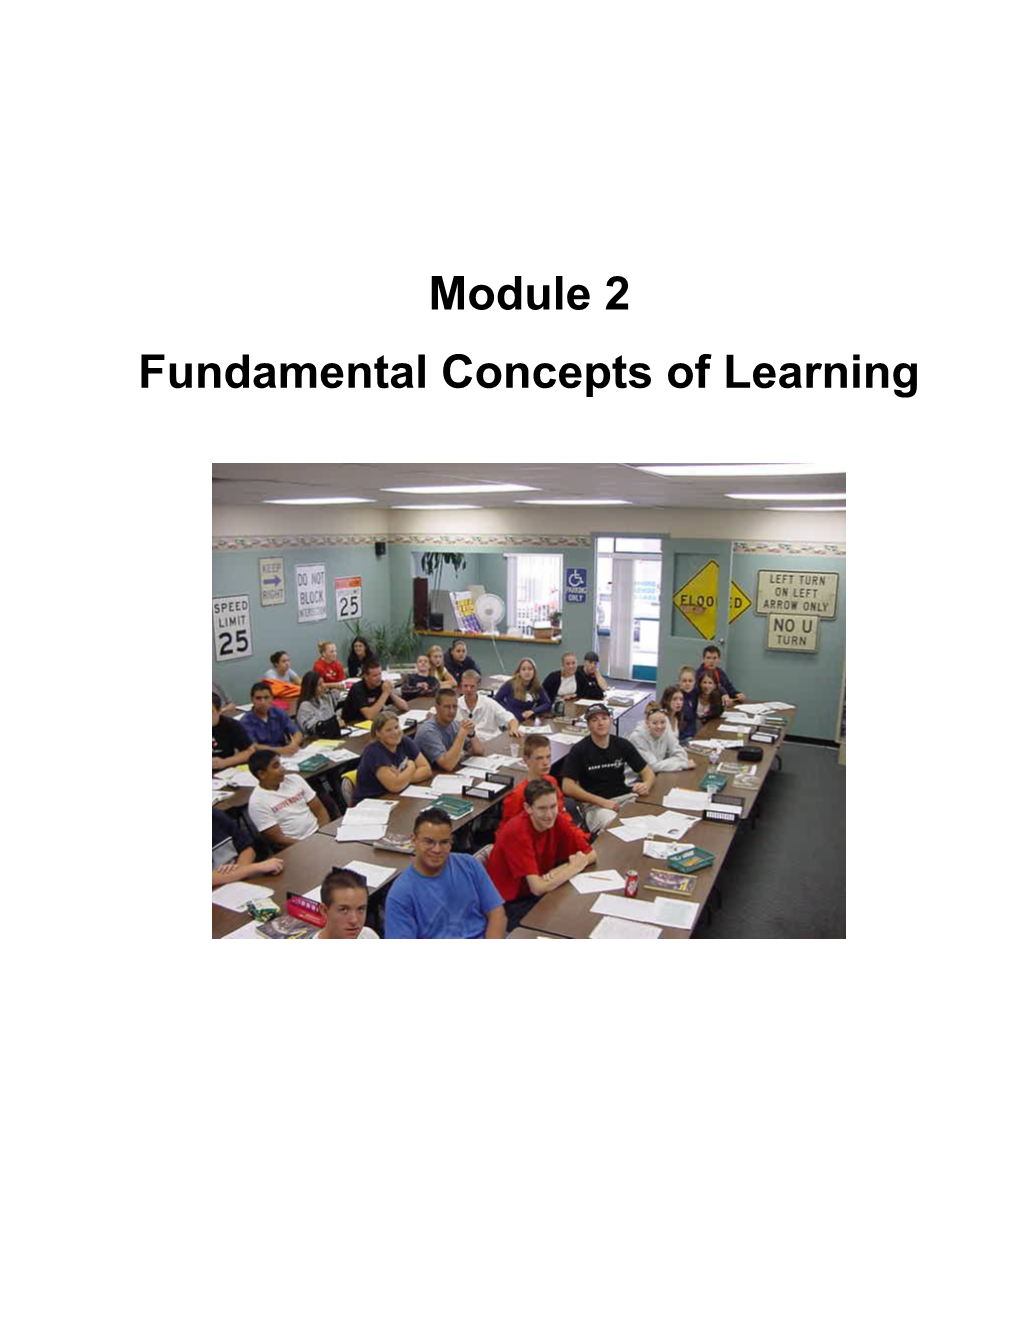 Fundamental Concepts of Learning